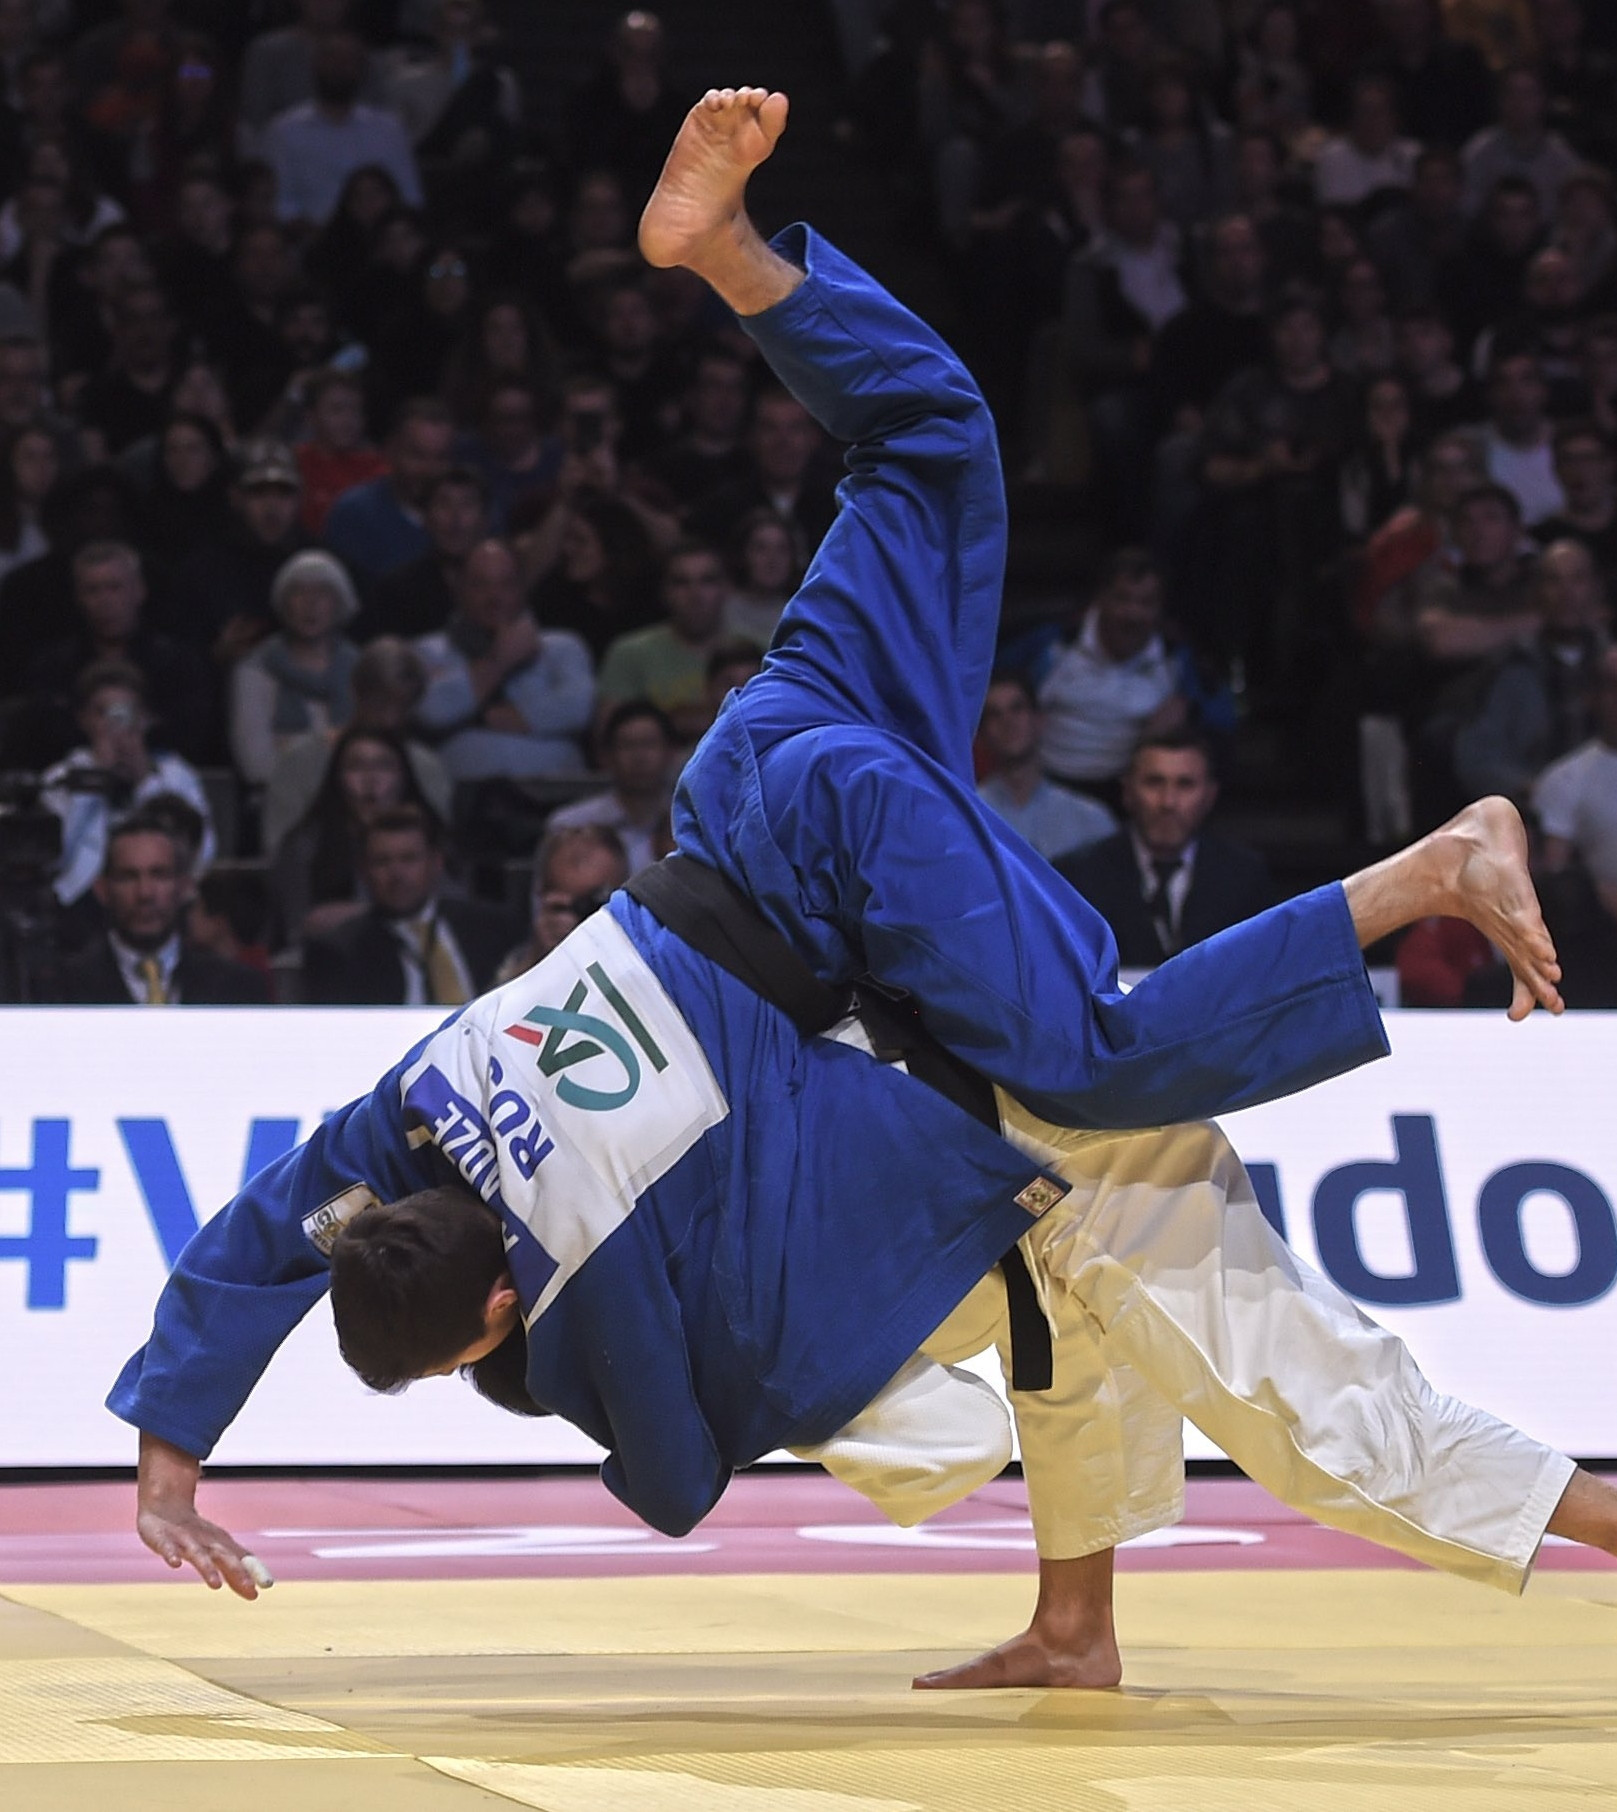 Japan's Nagayama Ryuju produced a remarkable comeback in the final of the men's under-60kg against Russia's Yago Abuladze to give his Tokyo 2020 hopes a big boost ©IJF